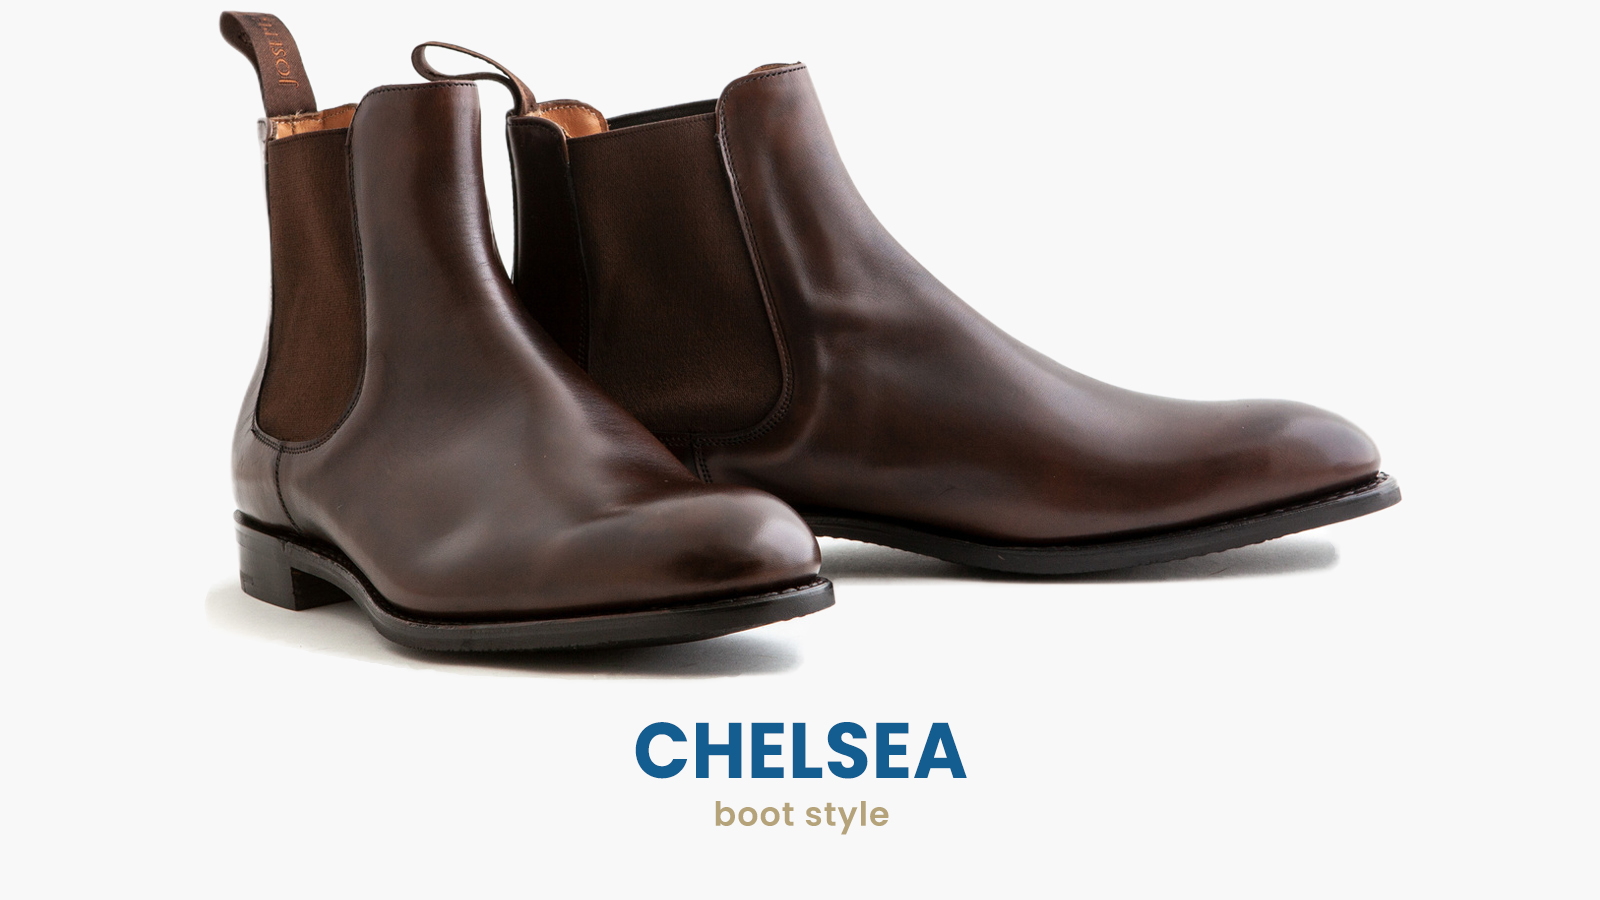 Chelsea dress boots style